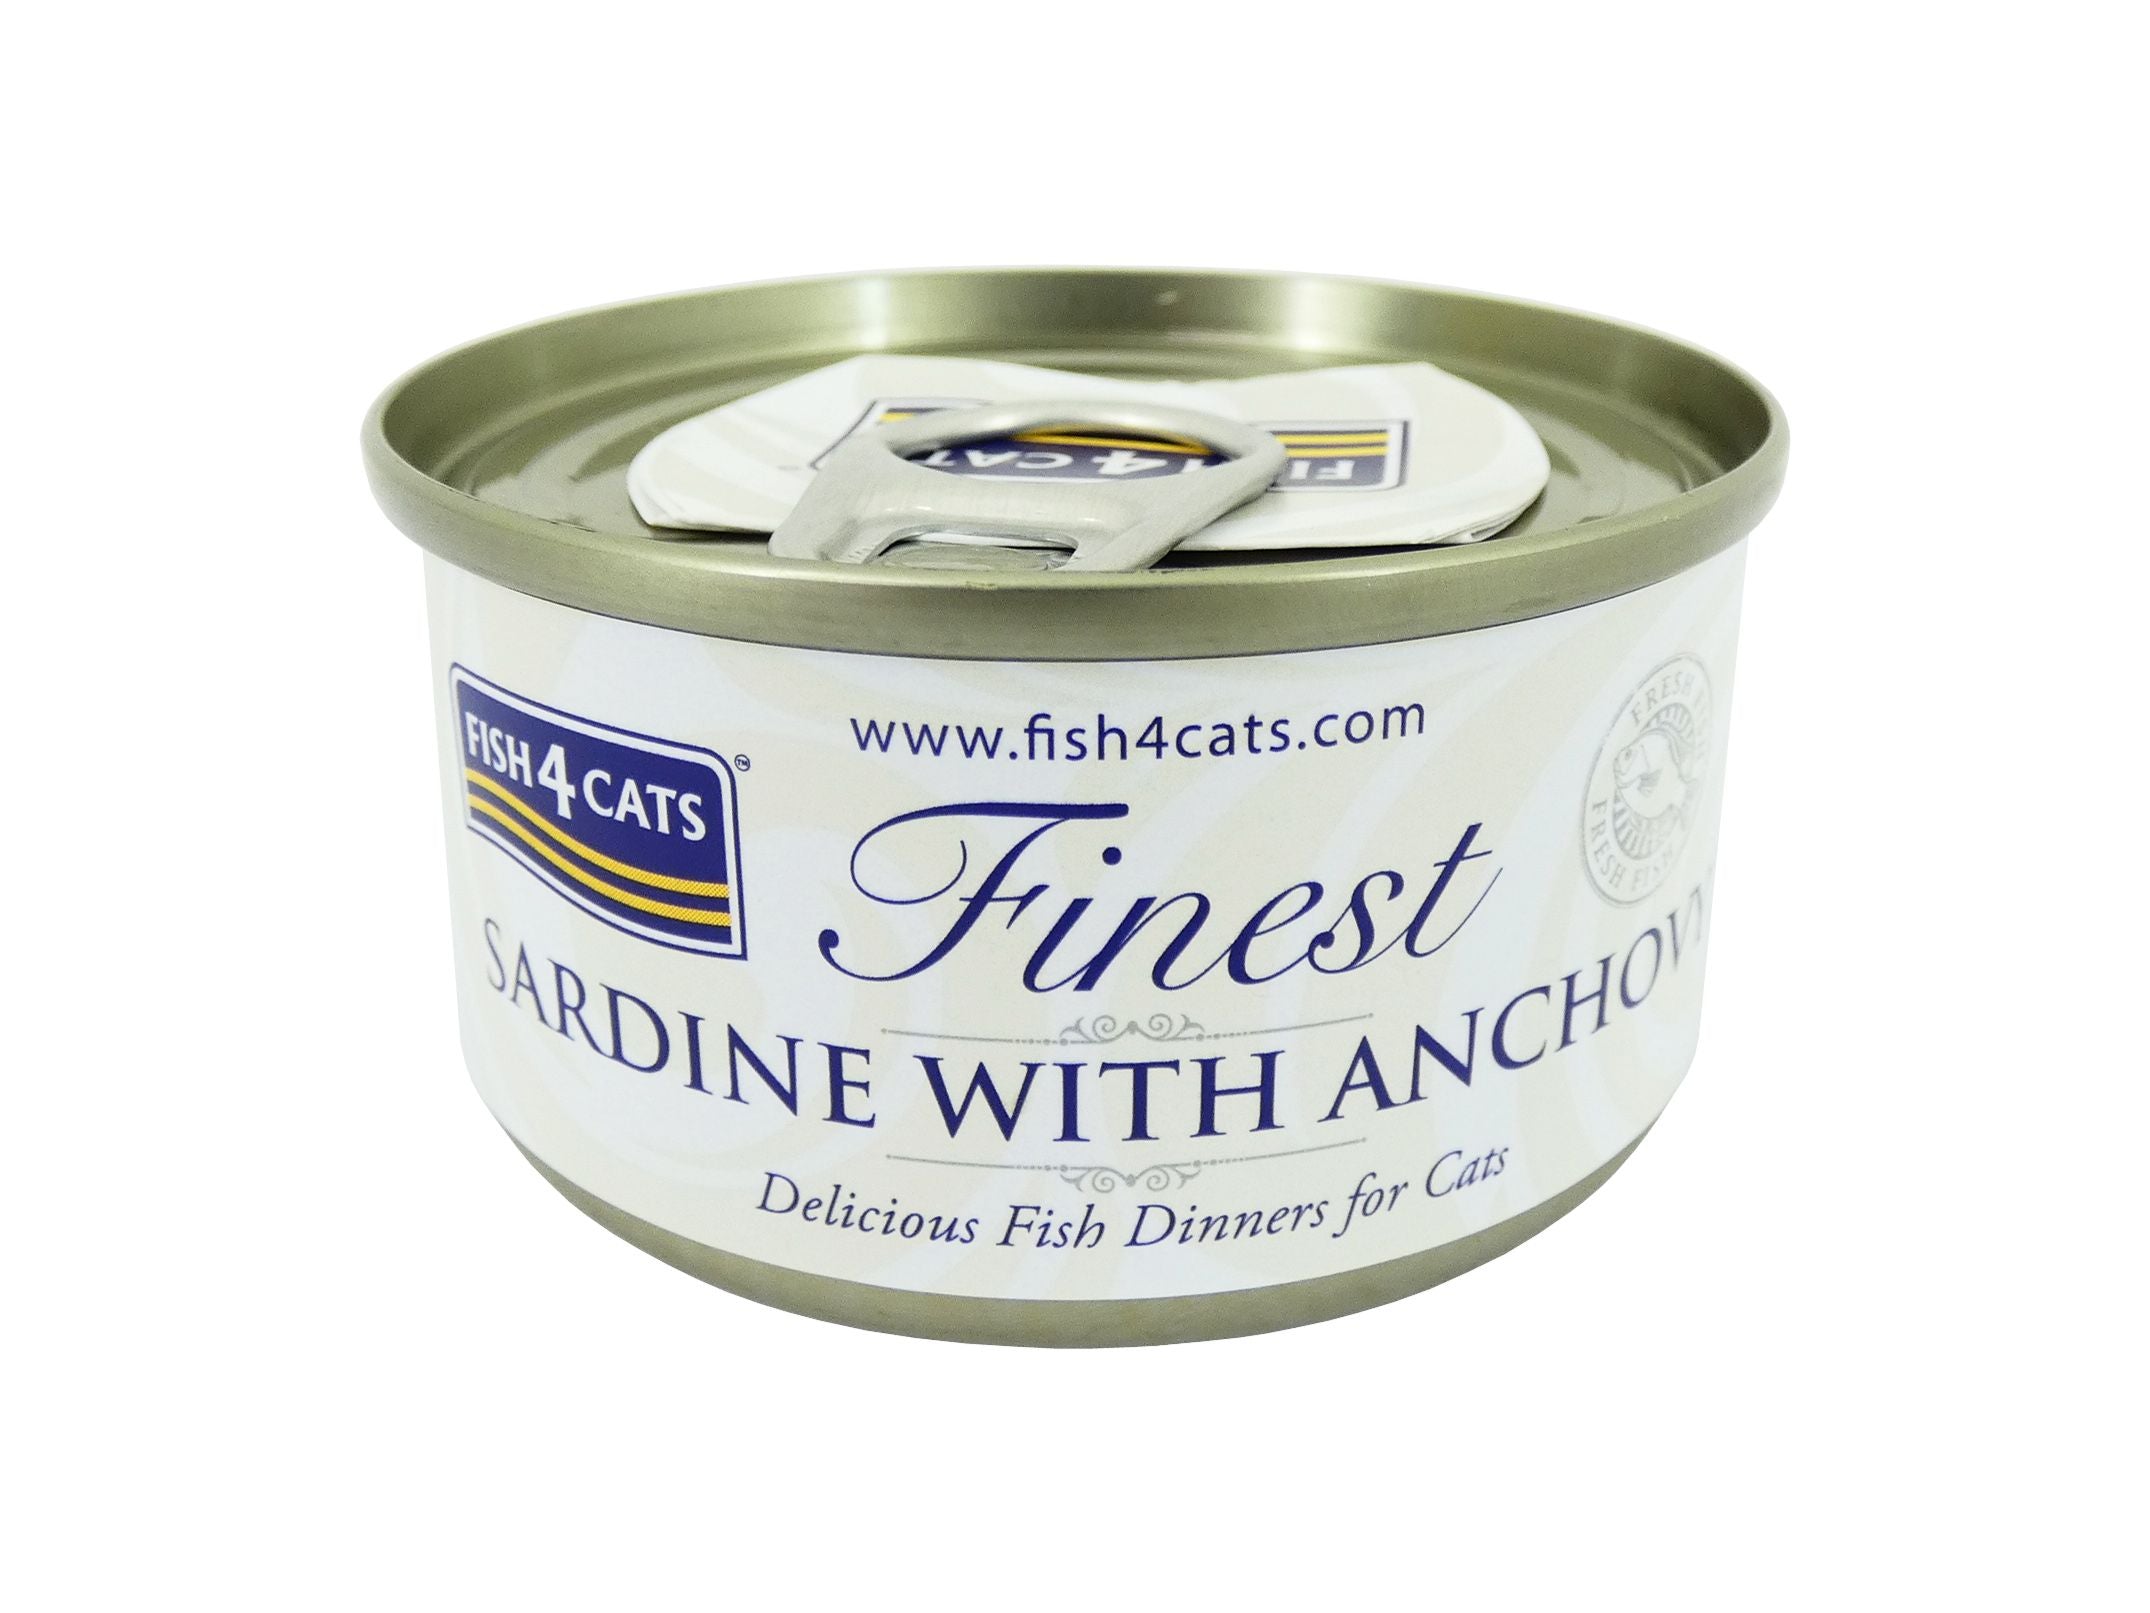 F4C Sardine&Anchovy 70G Cat Food Tinx10 - Wag n Tails Pet Shop